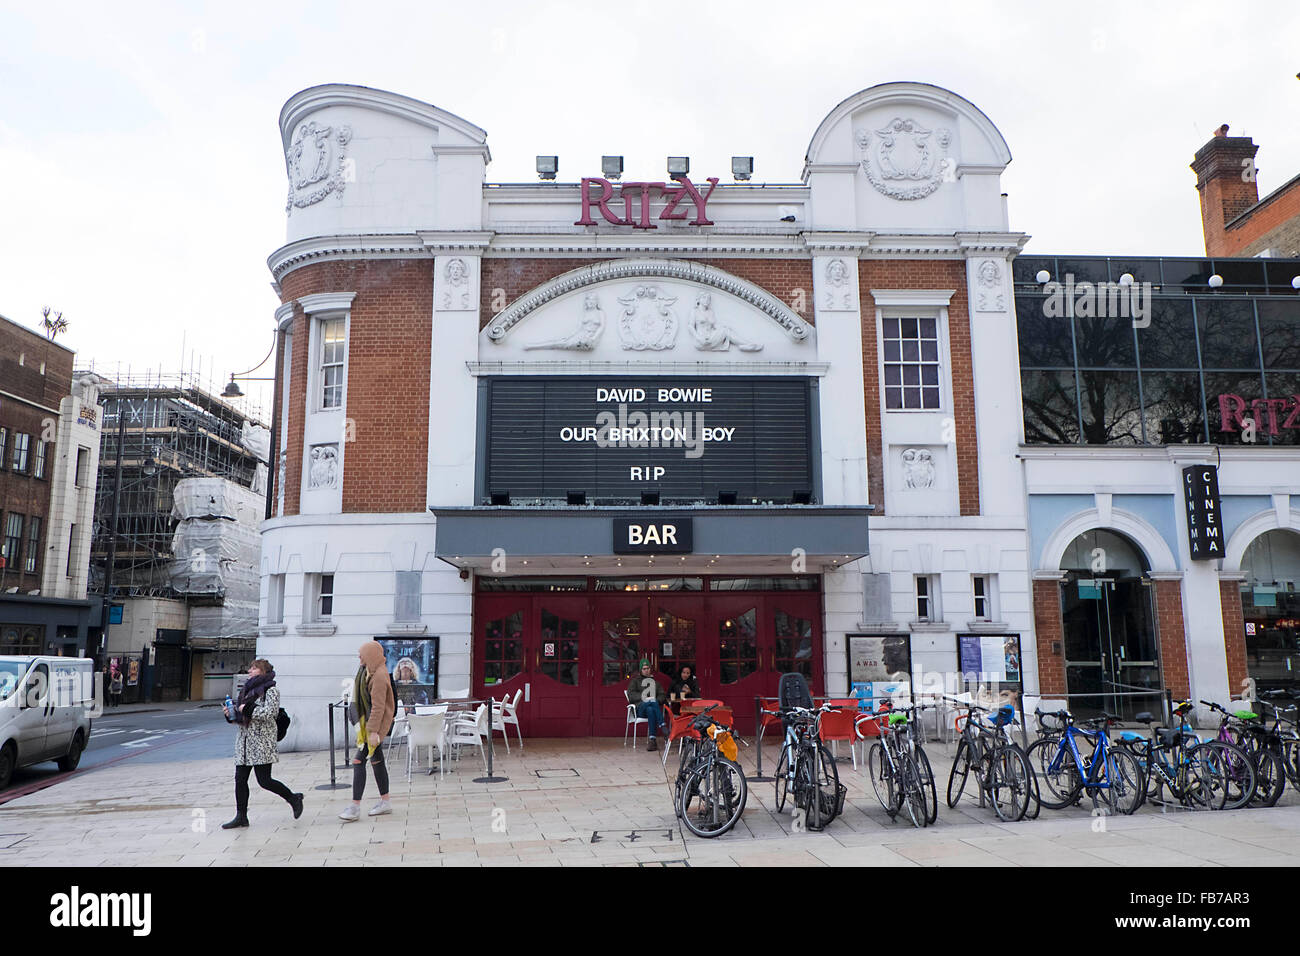 London, Britain. 11th Jan, 2016. The Ritzy Cinema in Brixton pays tribute to local hero David Bowie in Brixton, South London, Britain, on Jan. 11, 2016. David Bowie, the iconic British singer-songwriter died on Sunday, just two days after his 69th birthday, his family announced Monday in a brief statement. © Ray Tang/Xinhua/Alamy Live News Stock Photo